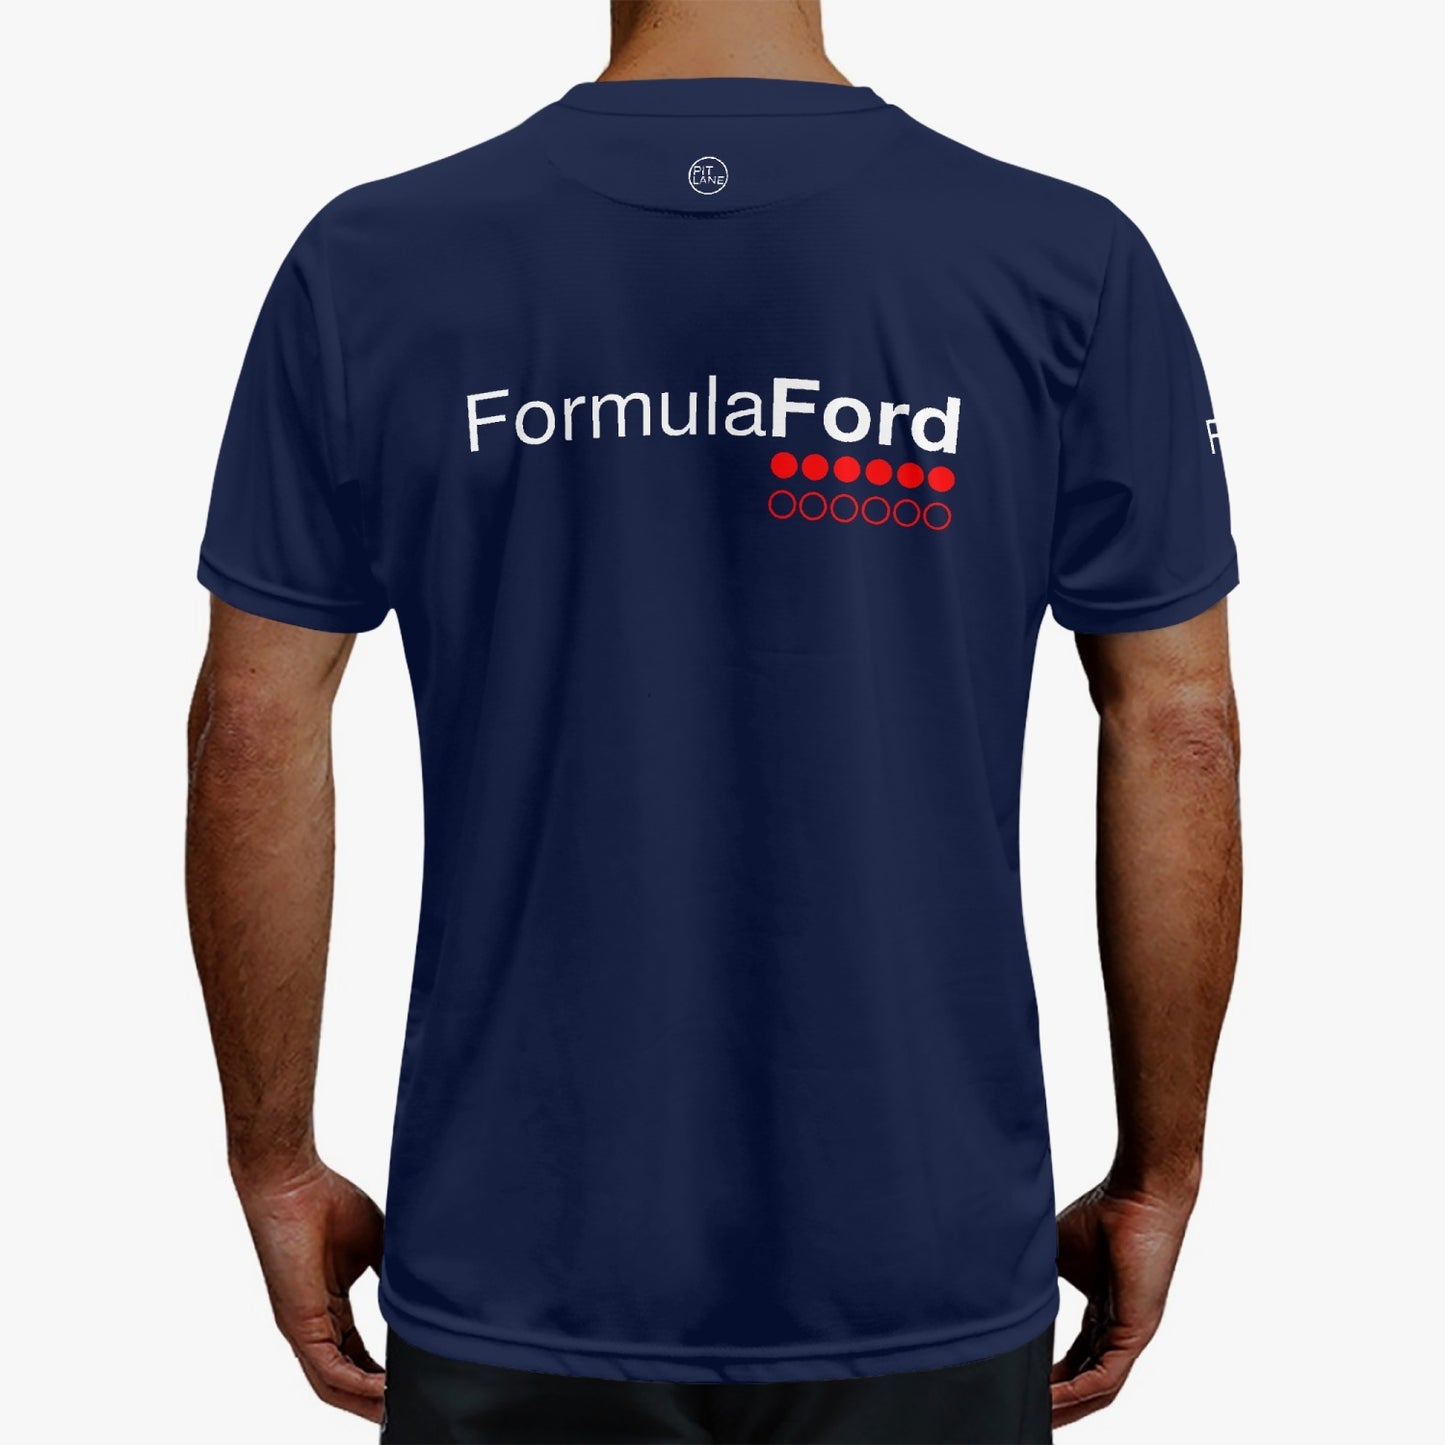 FORMULA FORD Official Moisture wicking Activewear T-shirt - Navy